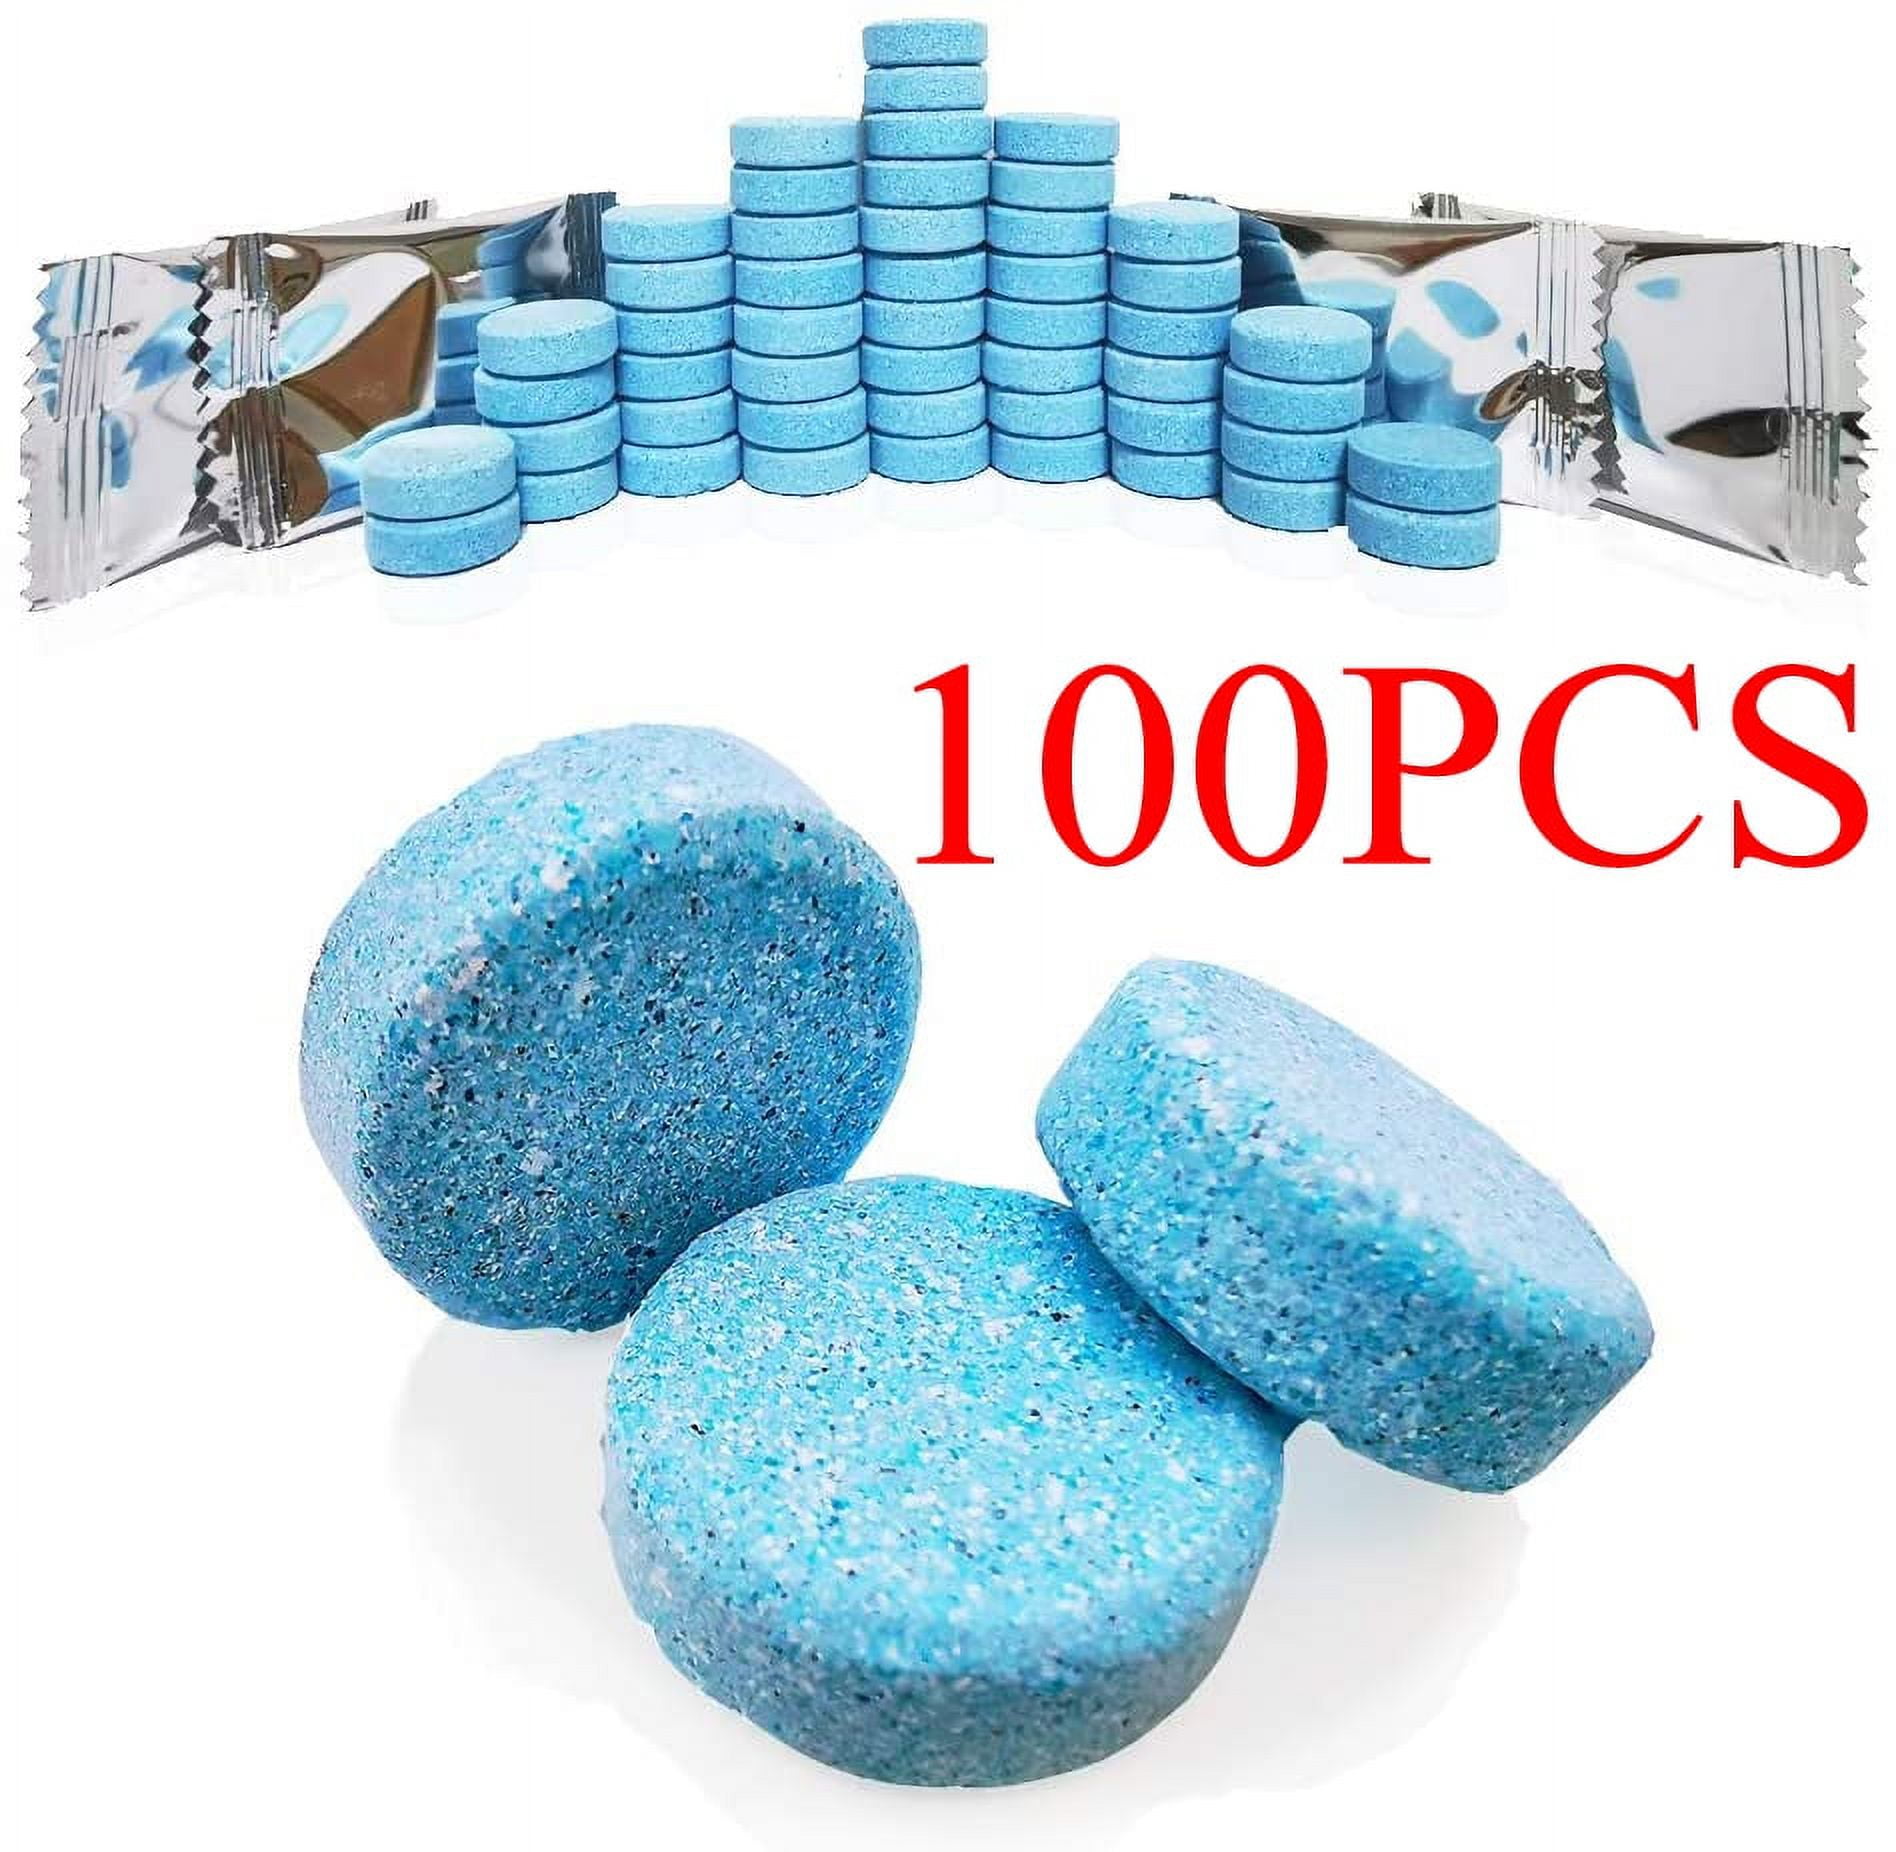 OBOSOE 100Pcs Windshield Washer Fluid Tablets,Wiper Fluid Concentrate,Washer  Cleaning Tool for Car Kitchen Window, 1 Piece Makes 1.05 Gallons,100 Pcs  Makes 105 Gallons(Winter: Use With Antifreeze) 